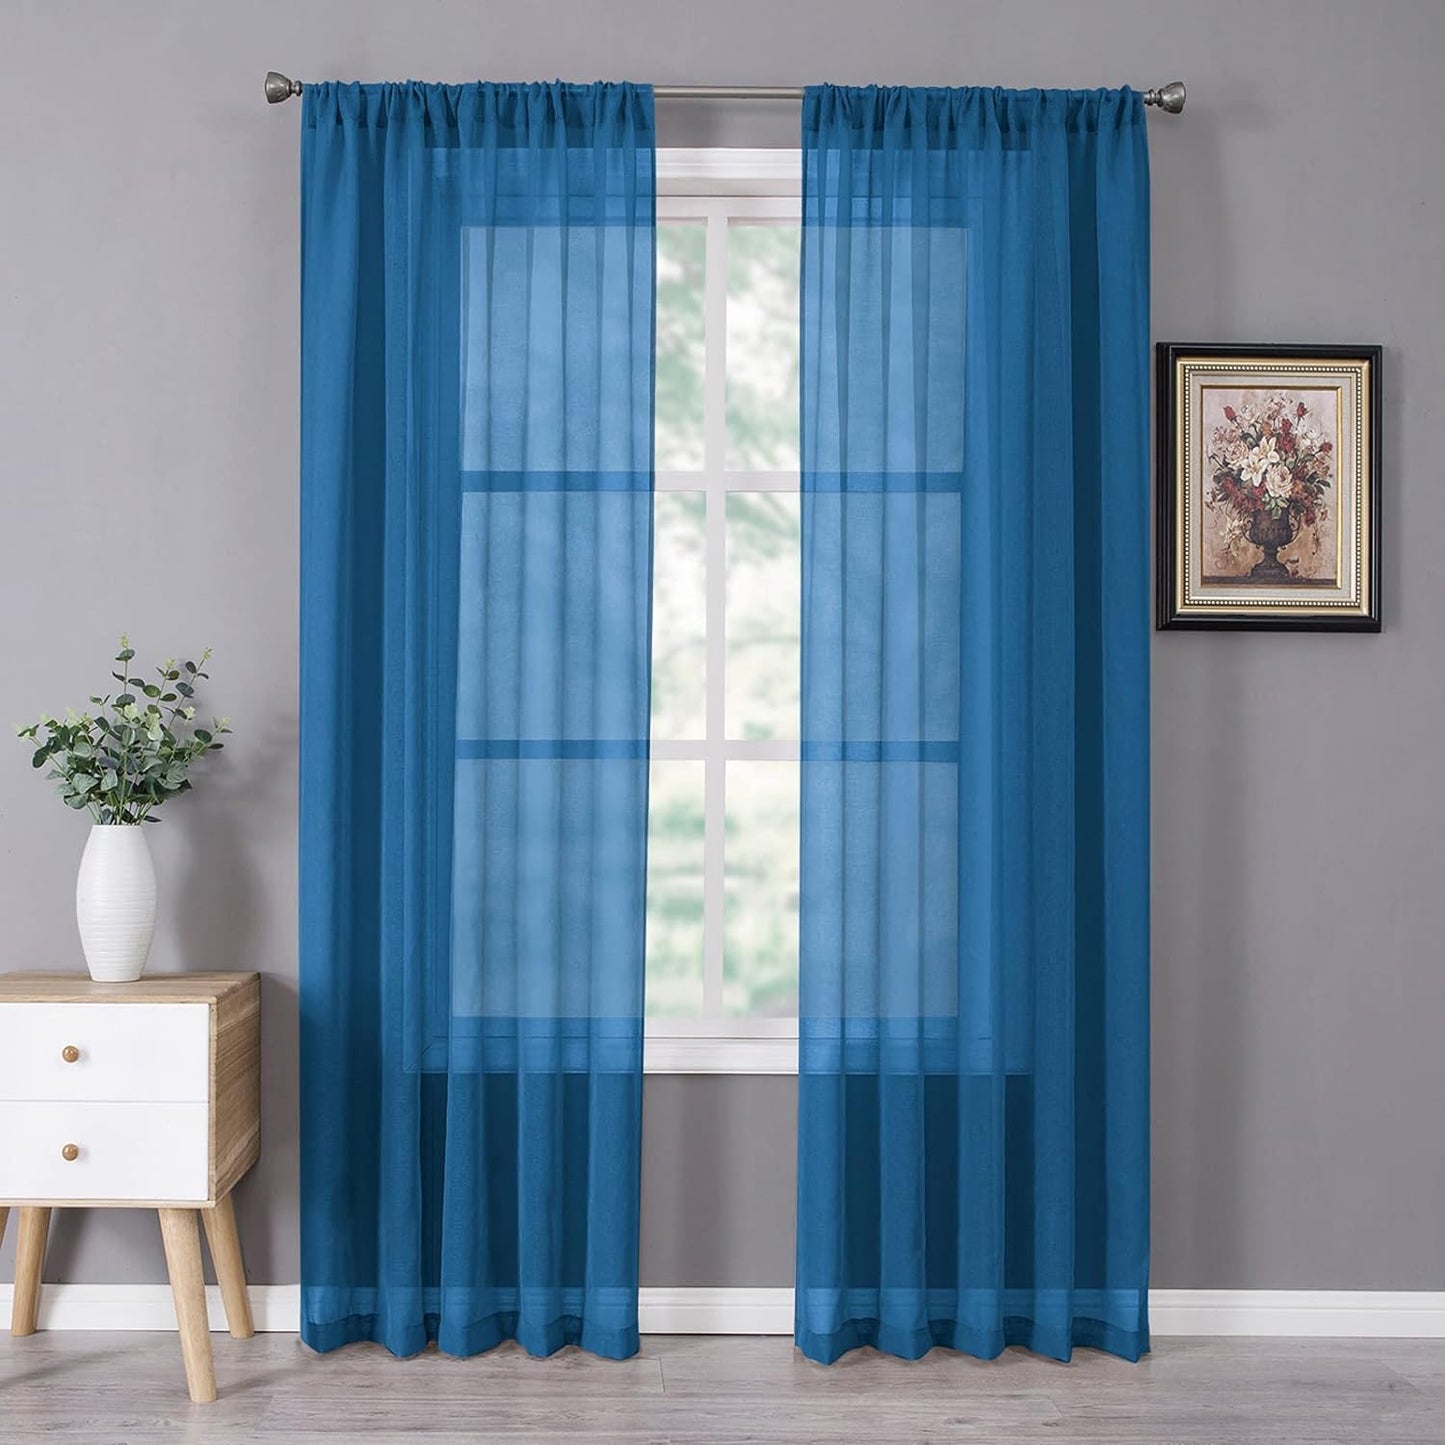 Tollpiz Short Sheer Curtains Linen Textured Bedroom Curtain Sheers Light Filtering Rod Pocket Voile Curtains for Living Room, 54 X 45 Inches Long, White, Set of 2 Panels  Tollpiz Tex Classic Blue 54"W X 72"L 